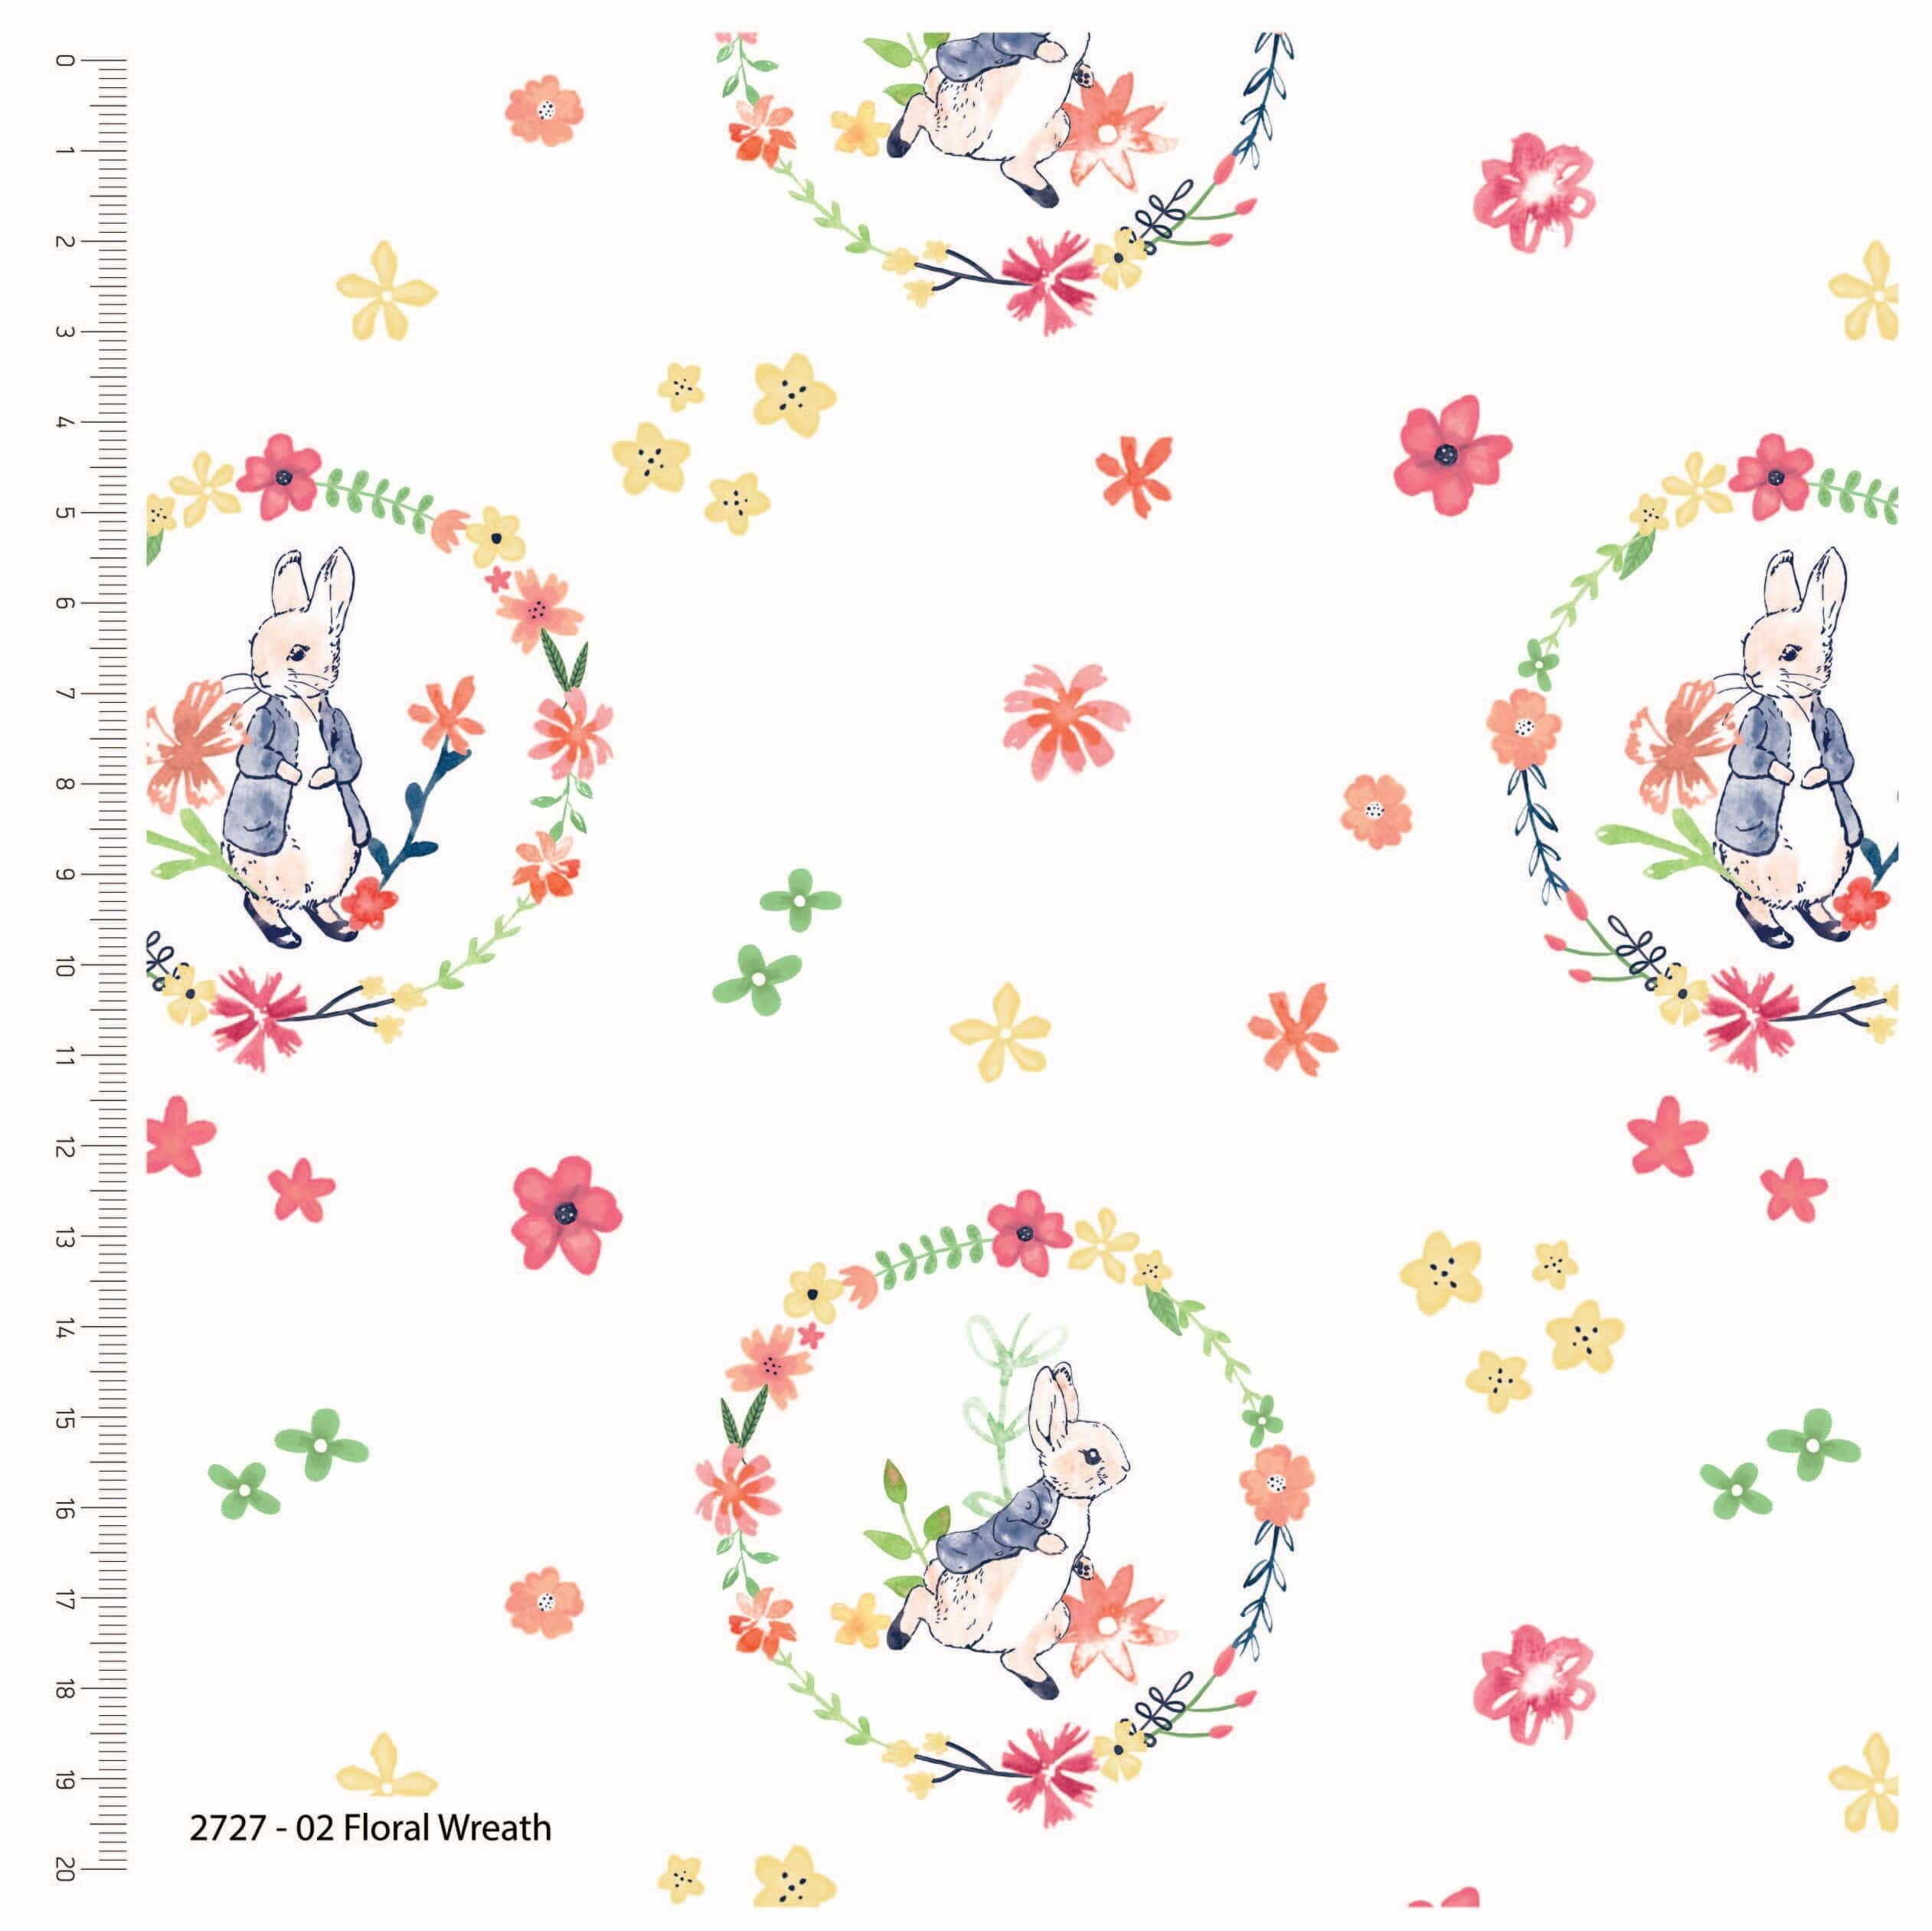 Fabric Peter Rabbit spring nursery fabric on white - 'Flowers and Dreams' CraftCottonCo